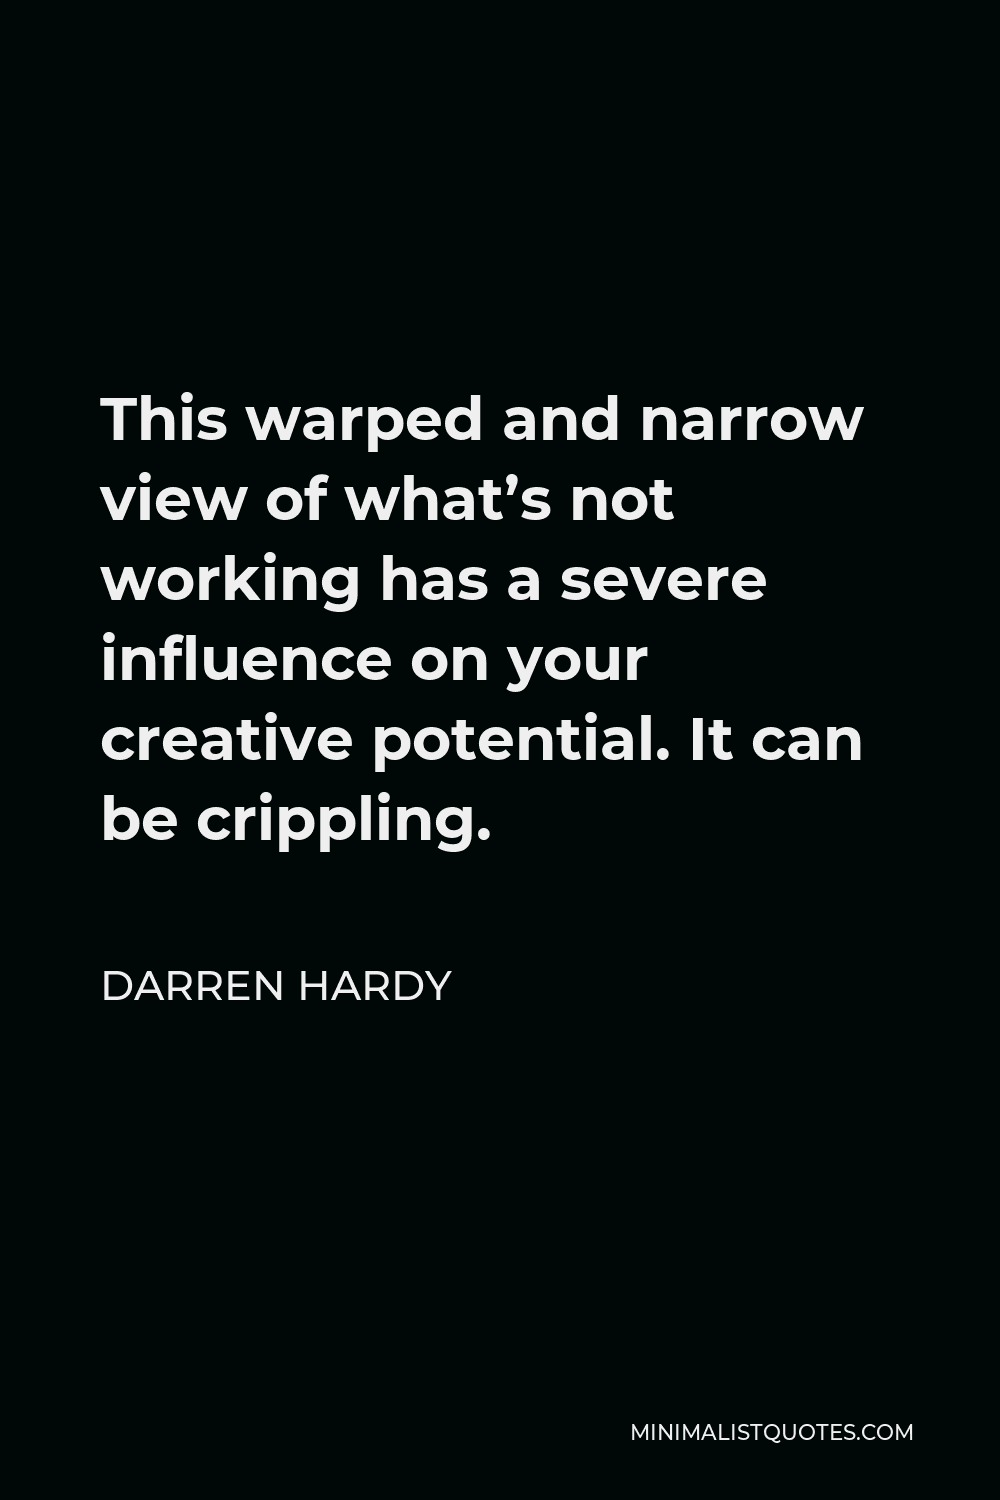 Darren Hardy Quote - This warped and narrow view of what’s not working has a severe influence on your creative potential. It can be crippling.